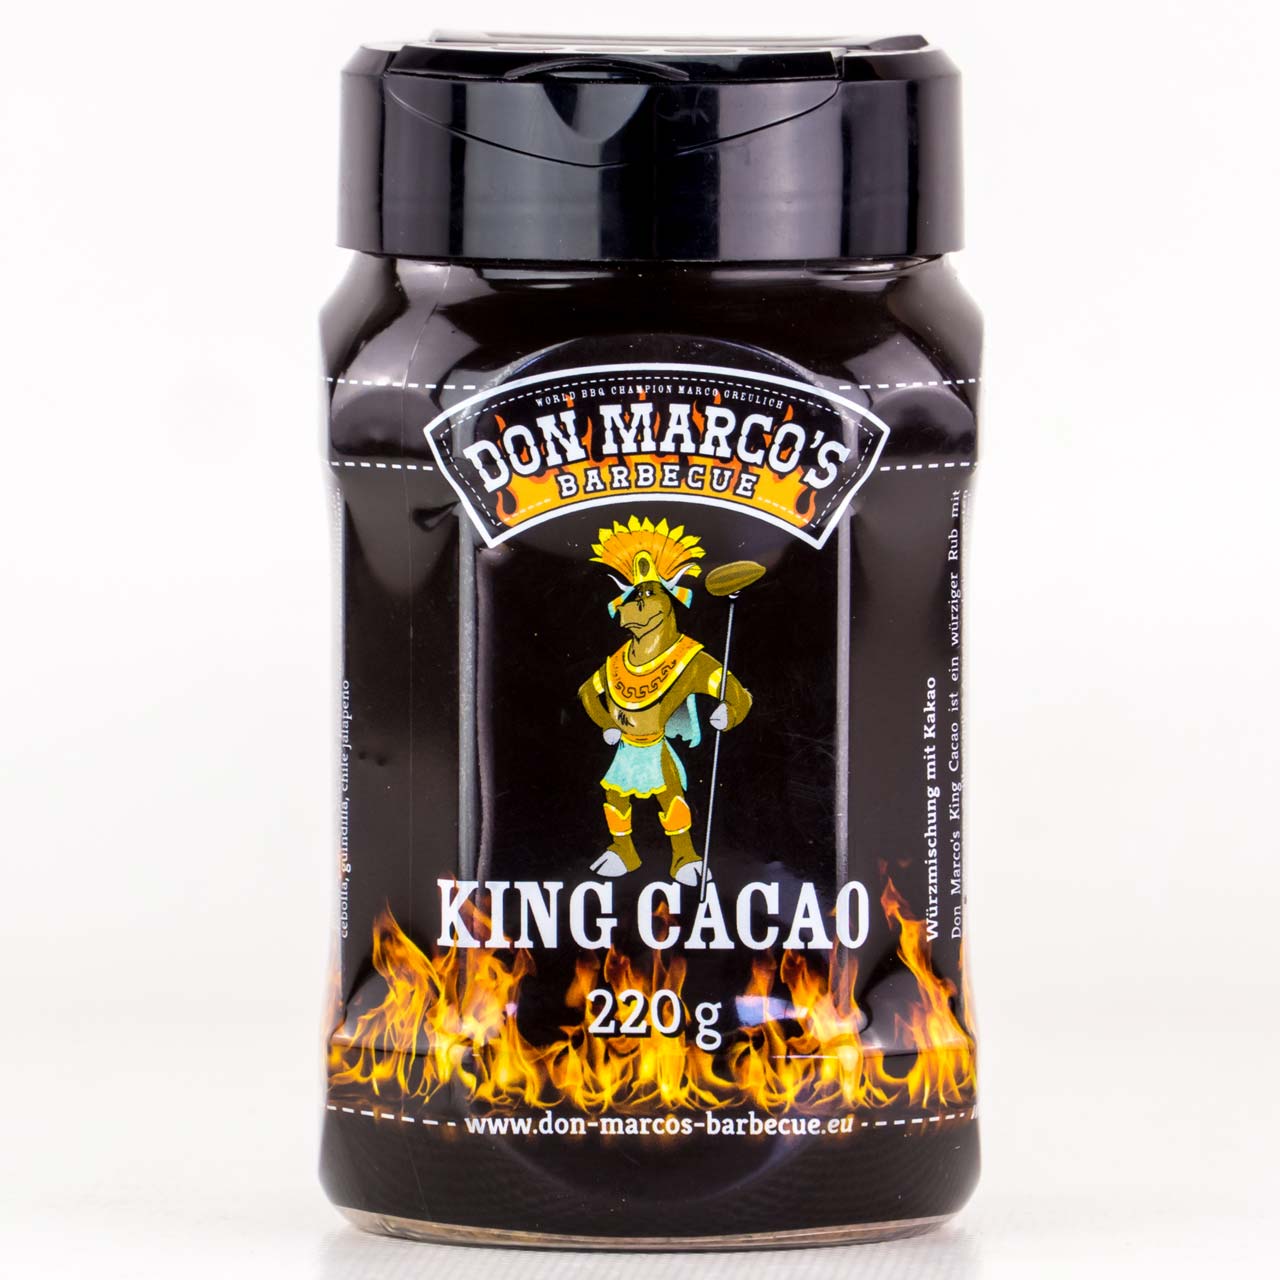 Don Marco's - King Cacao Rub